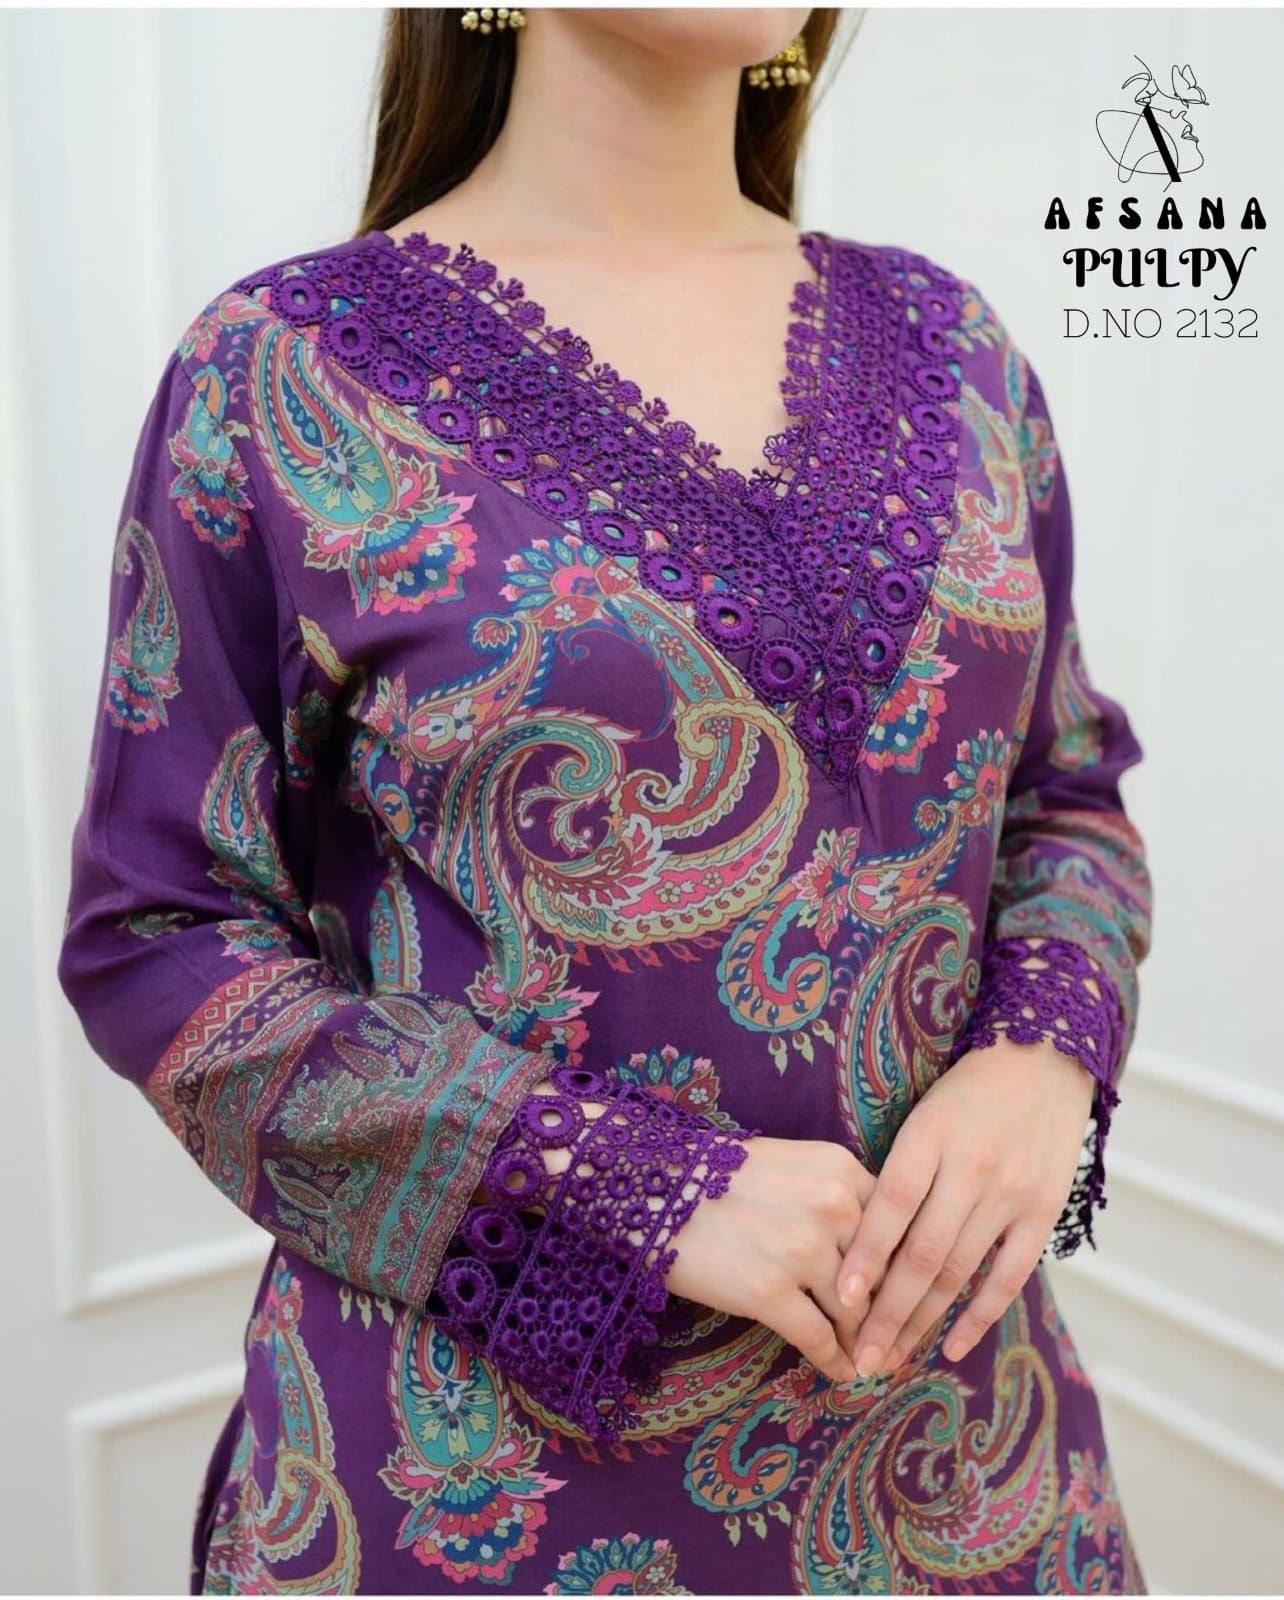 Pulpy 2132 Afsana Pure Muslin Readymade Pant Style Suits